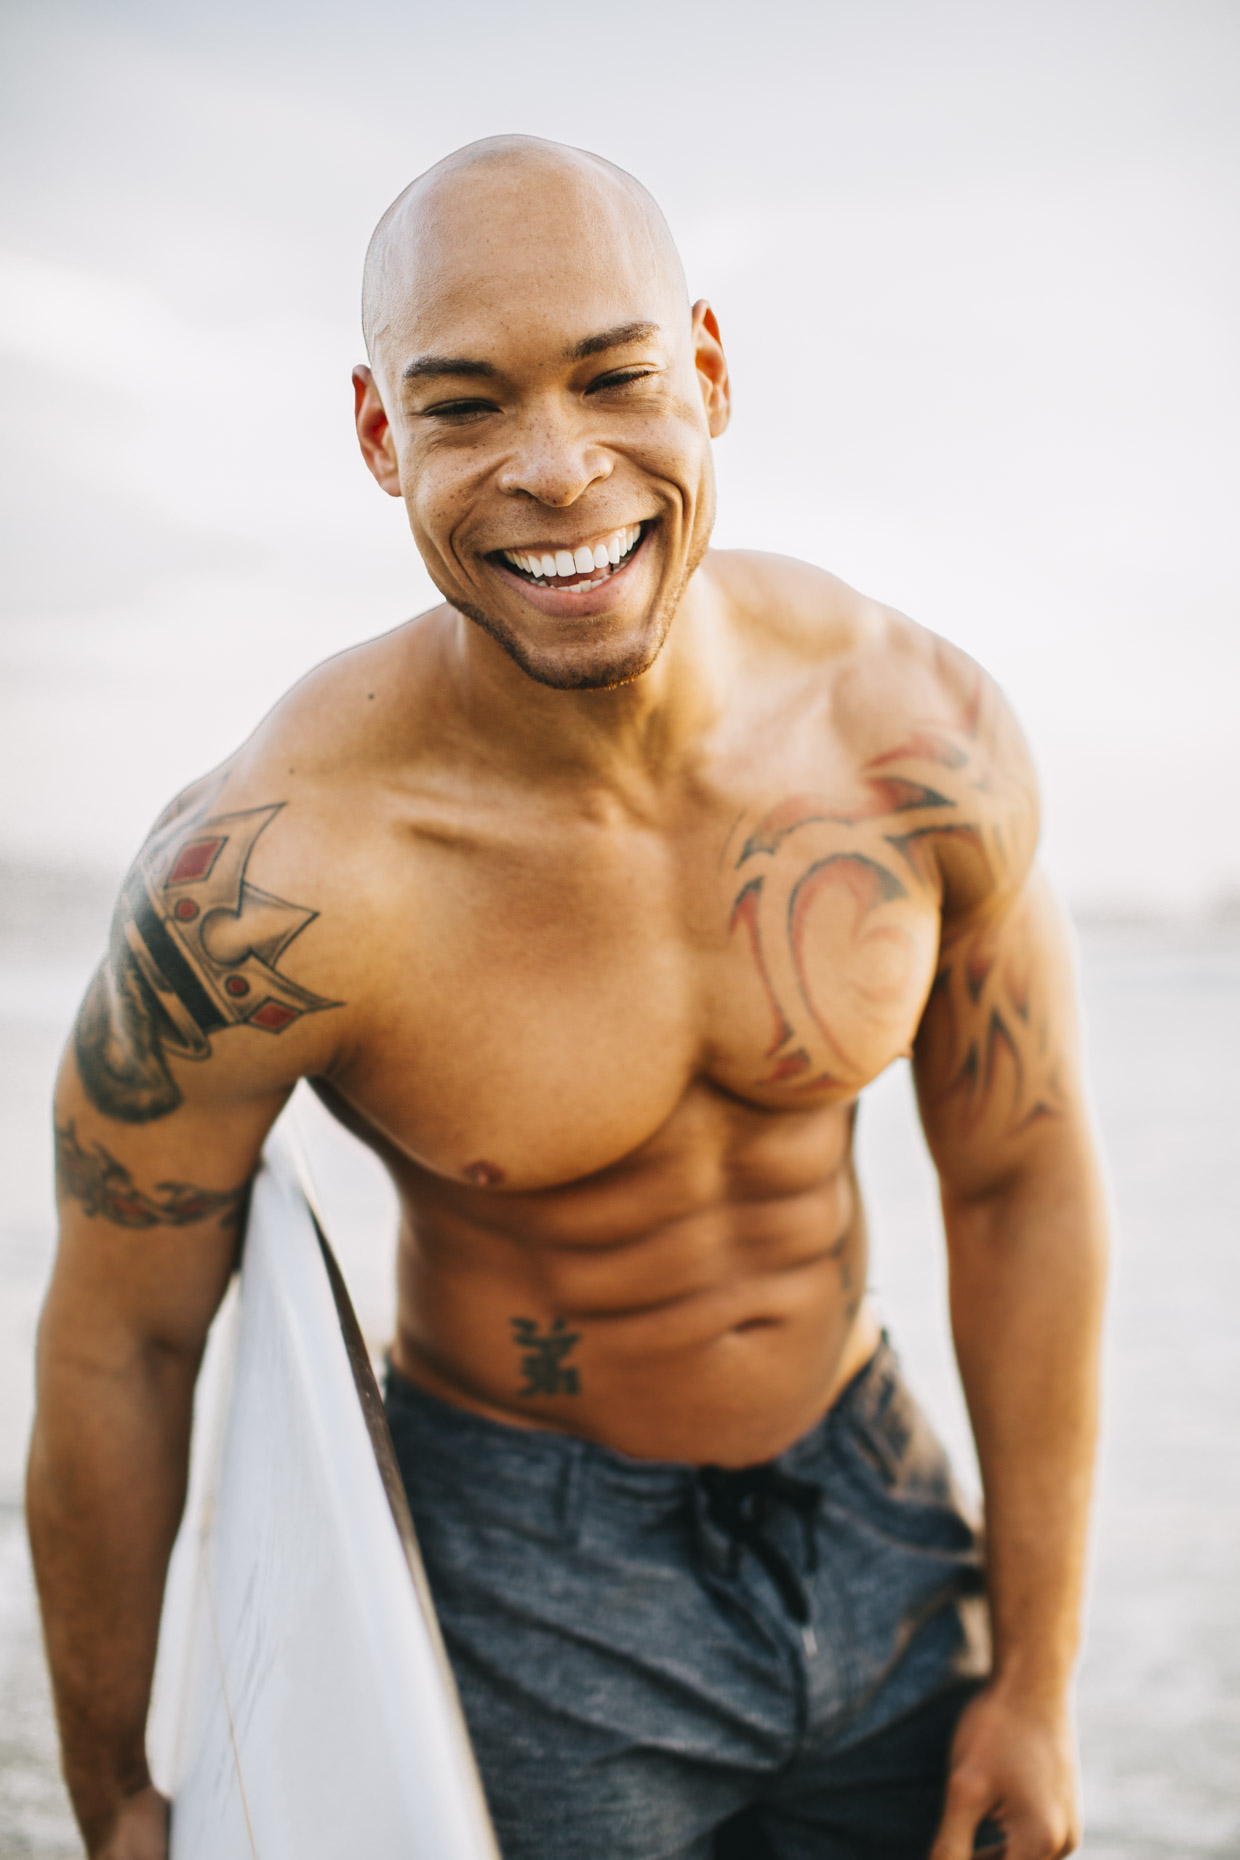 Fit man with bald head and surfboard laughing